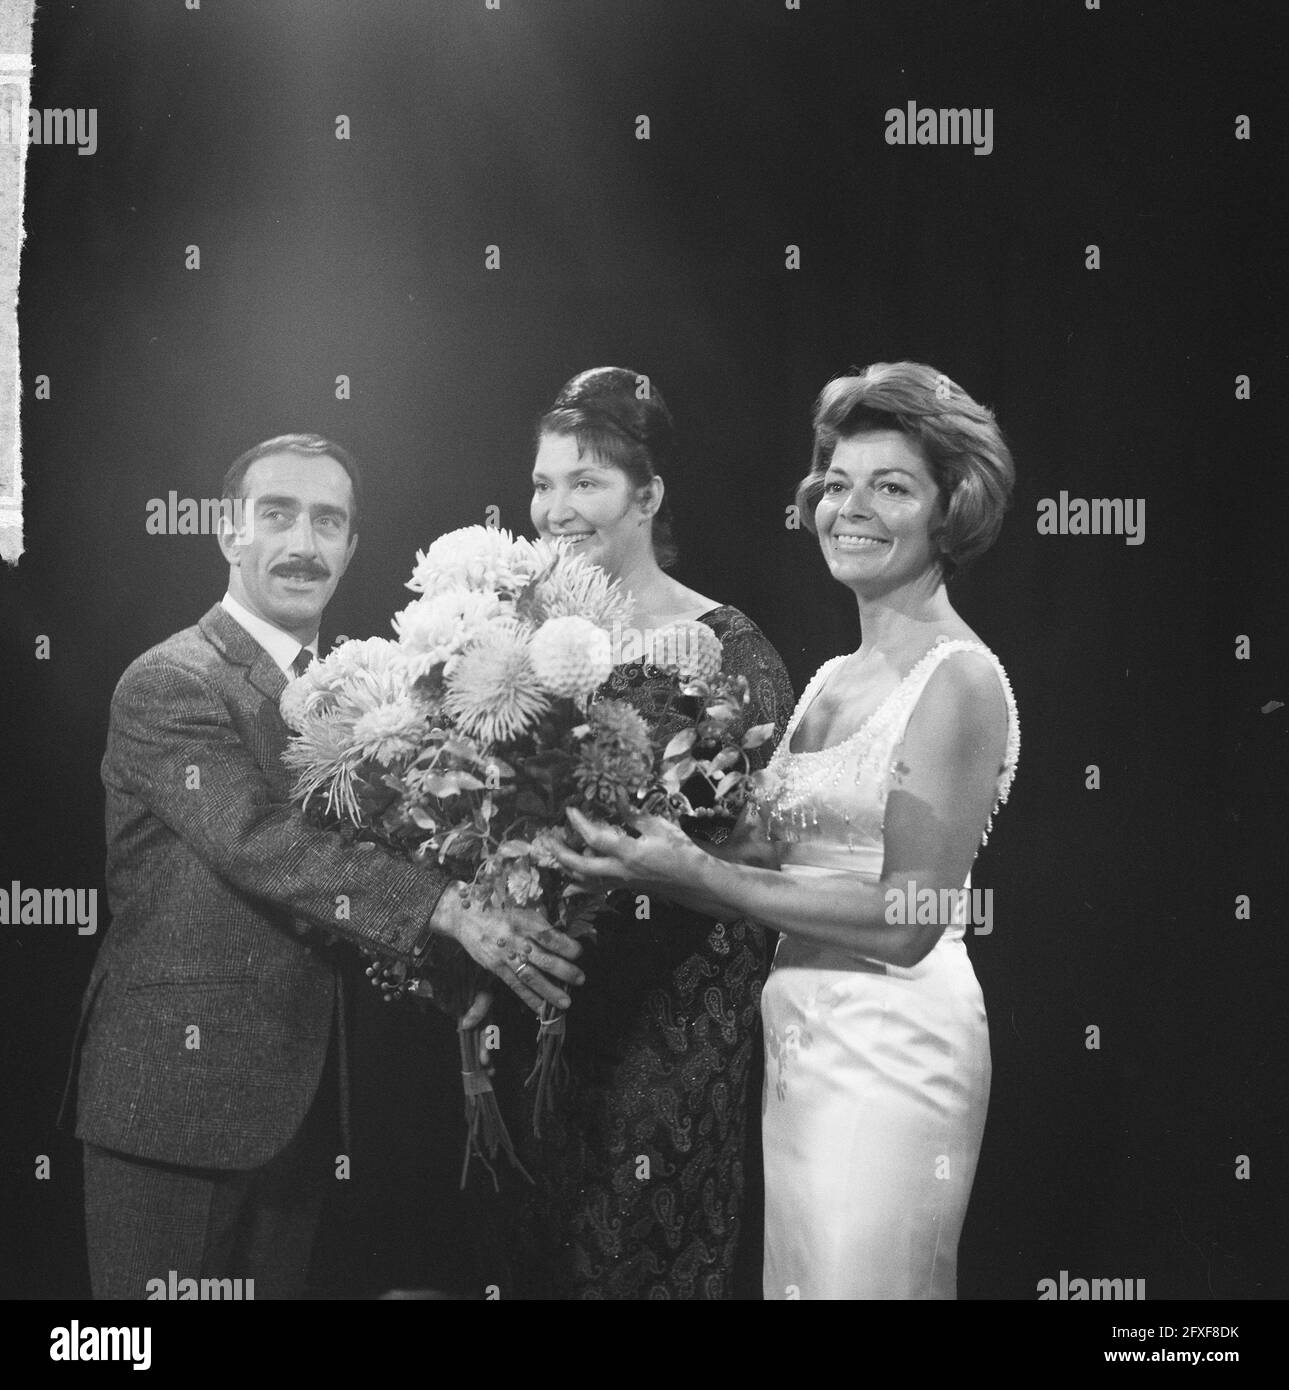 TV show Well you again, left to right Rita Corita, Bueno de Mesquita, Lys Assia, December 4, 1964, TV shows, The Netherlands, 20th century press agency photo, news to remember, documentary, historic photography 1945-1990, visual stories, human history of the Twentieth Century, capturing moments in time Stock Photo